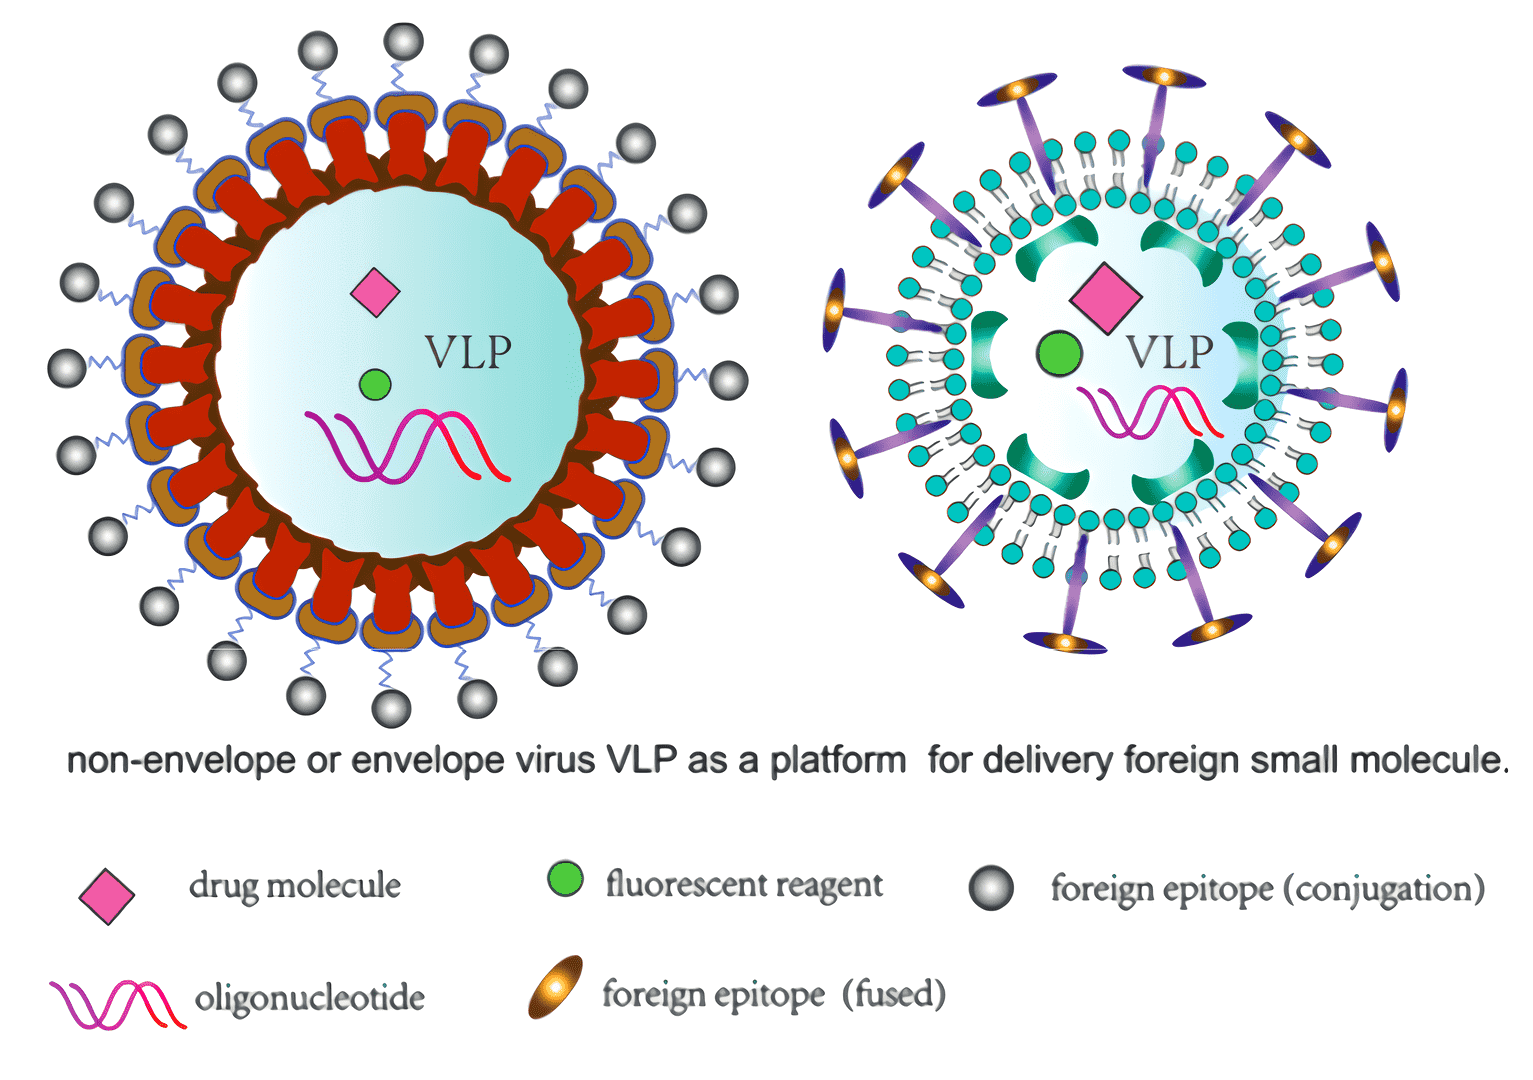 A schematic representation of assembly VLPs derived from enveloped or nonenveloped viruses.